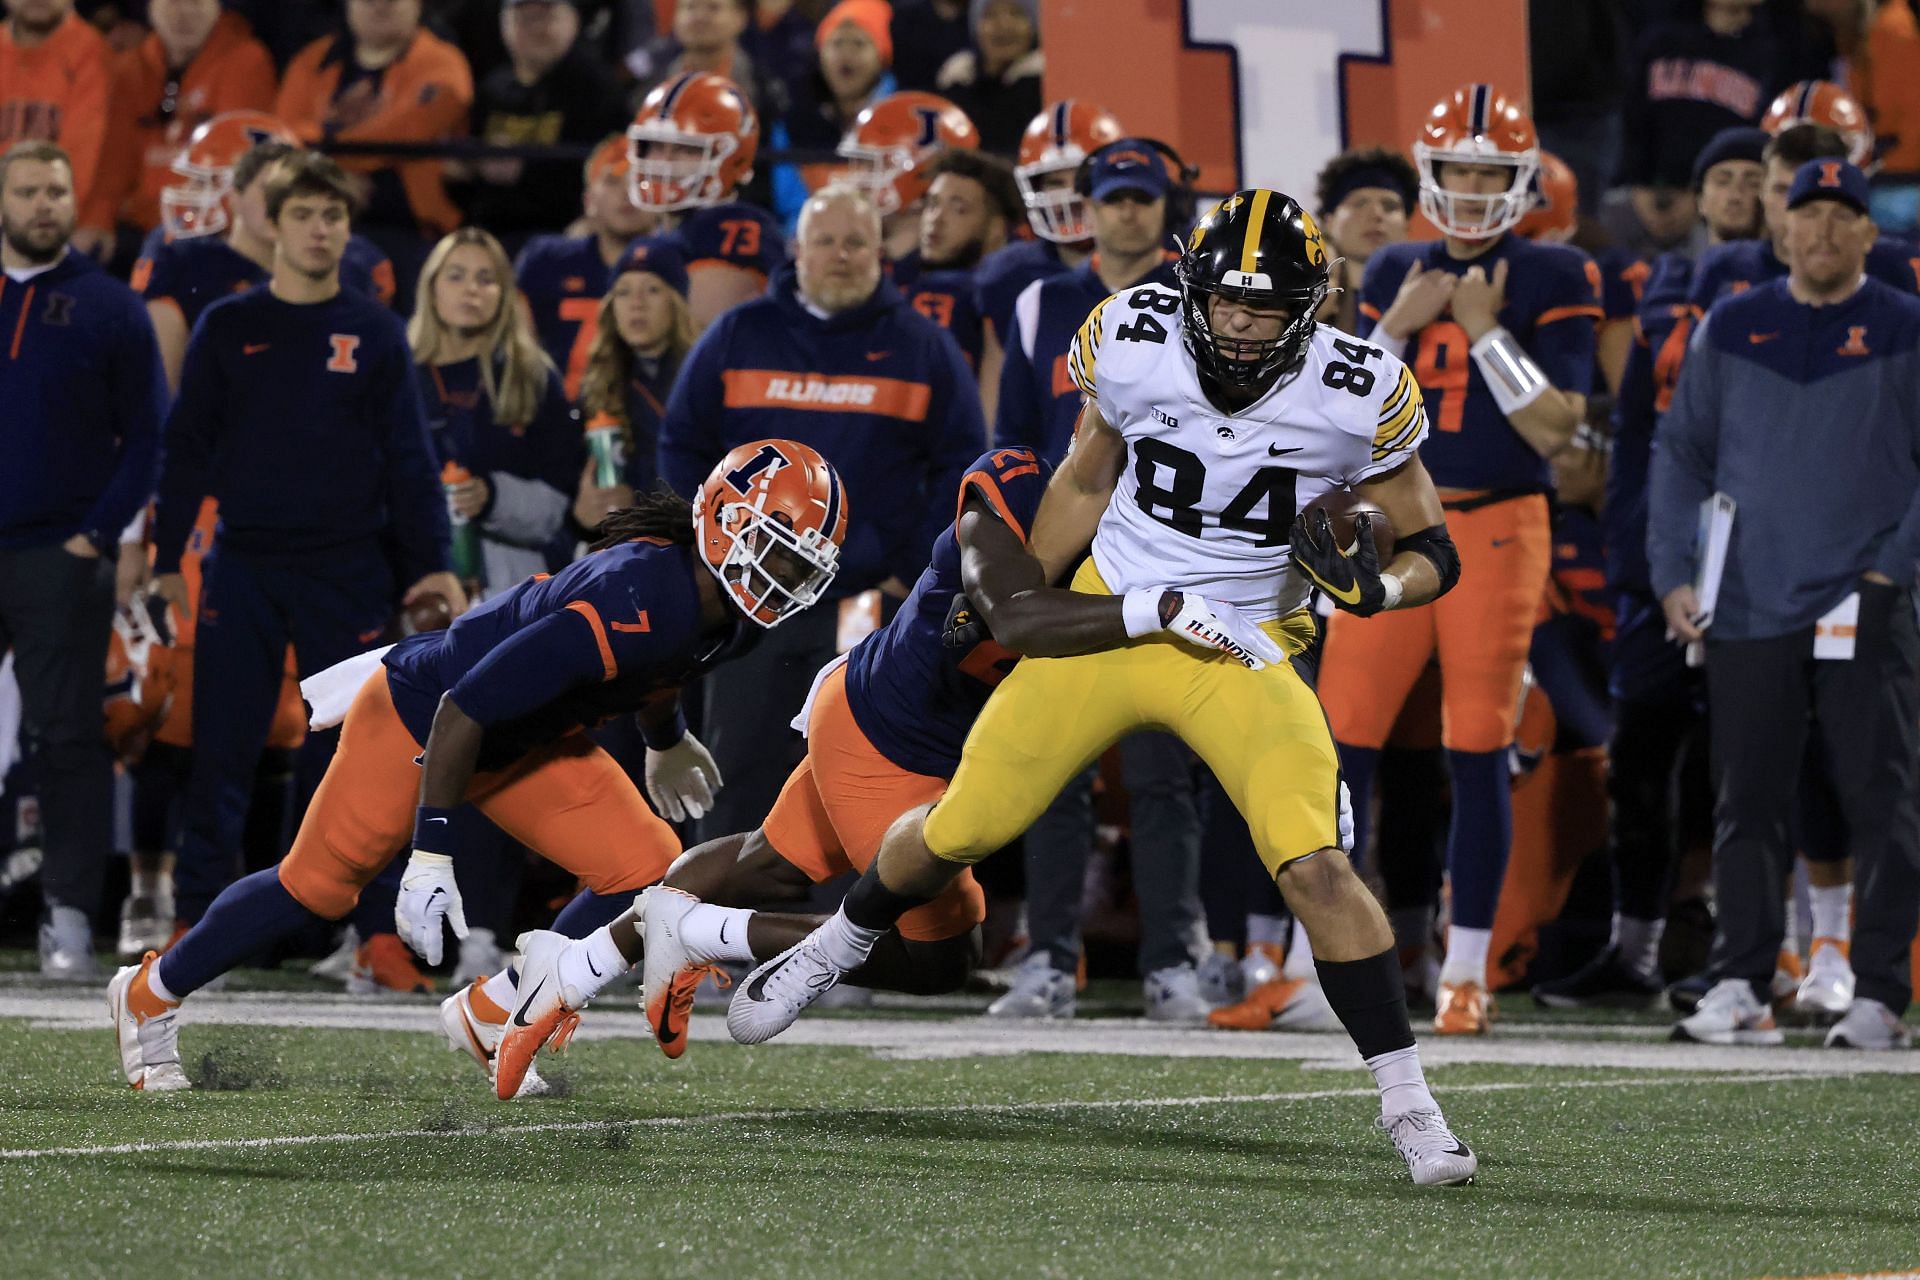 Sam LaPorta #84 of the Iowa Hawkeyes is tackled by Jartavius Martin #21 and Kendall Smith #7 of the Illinois Fighting Illini 